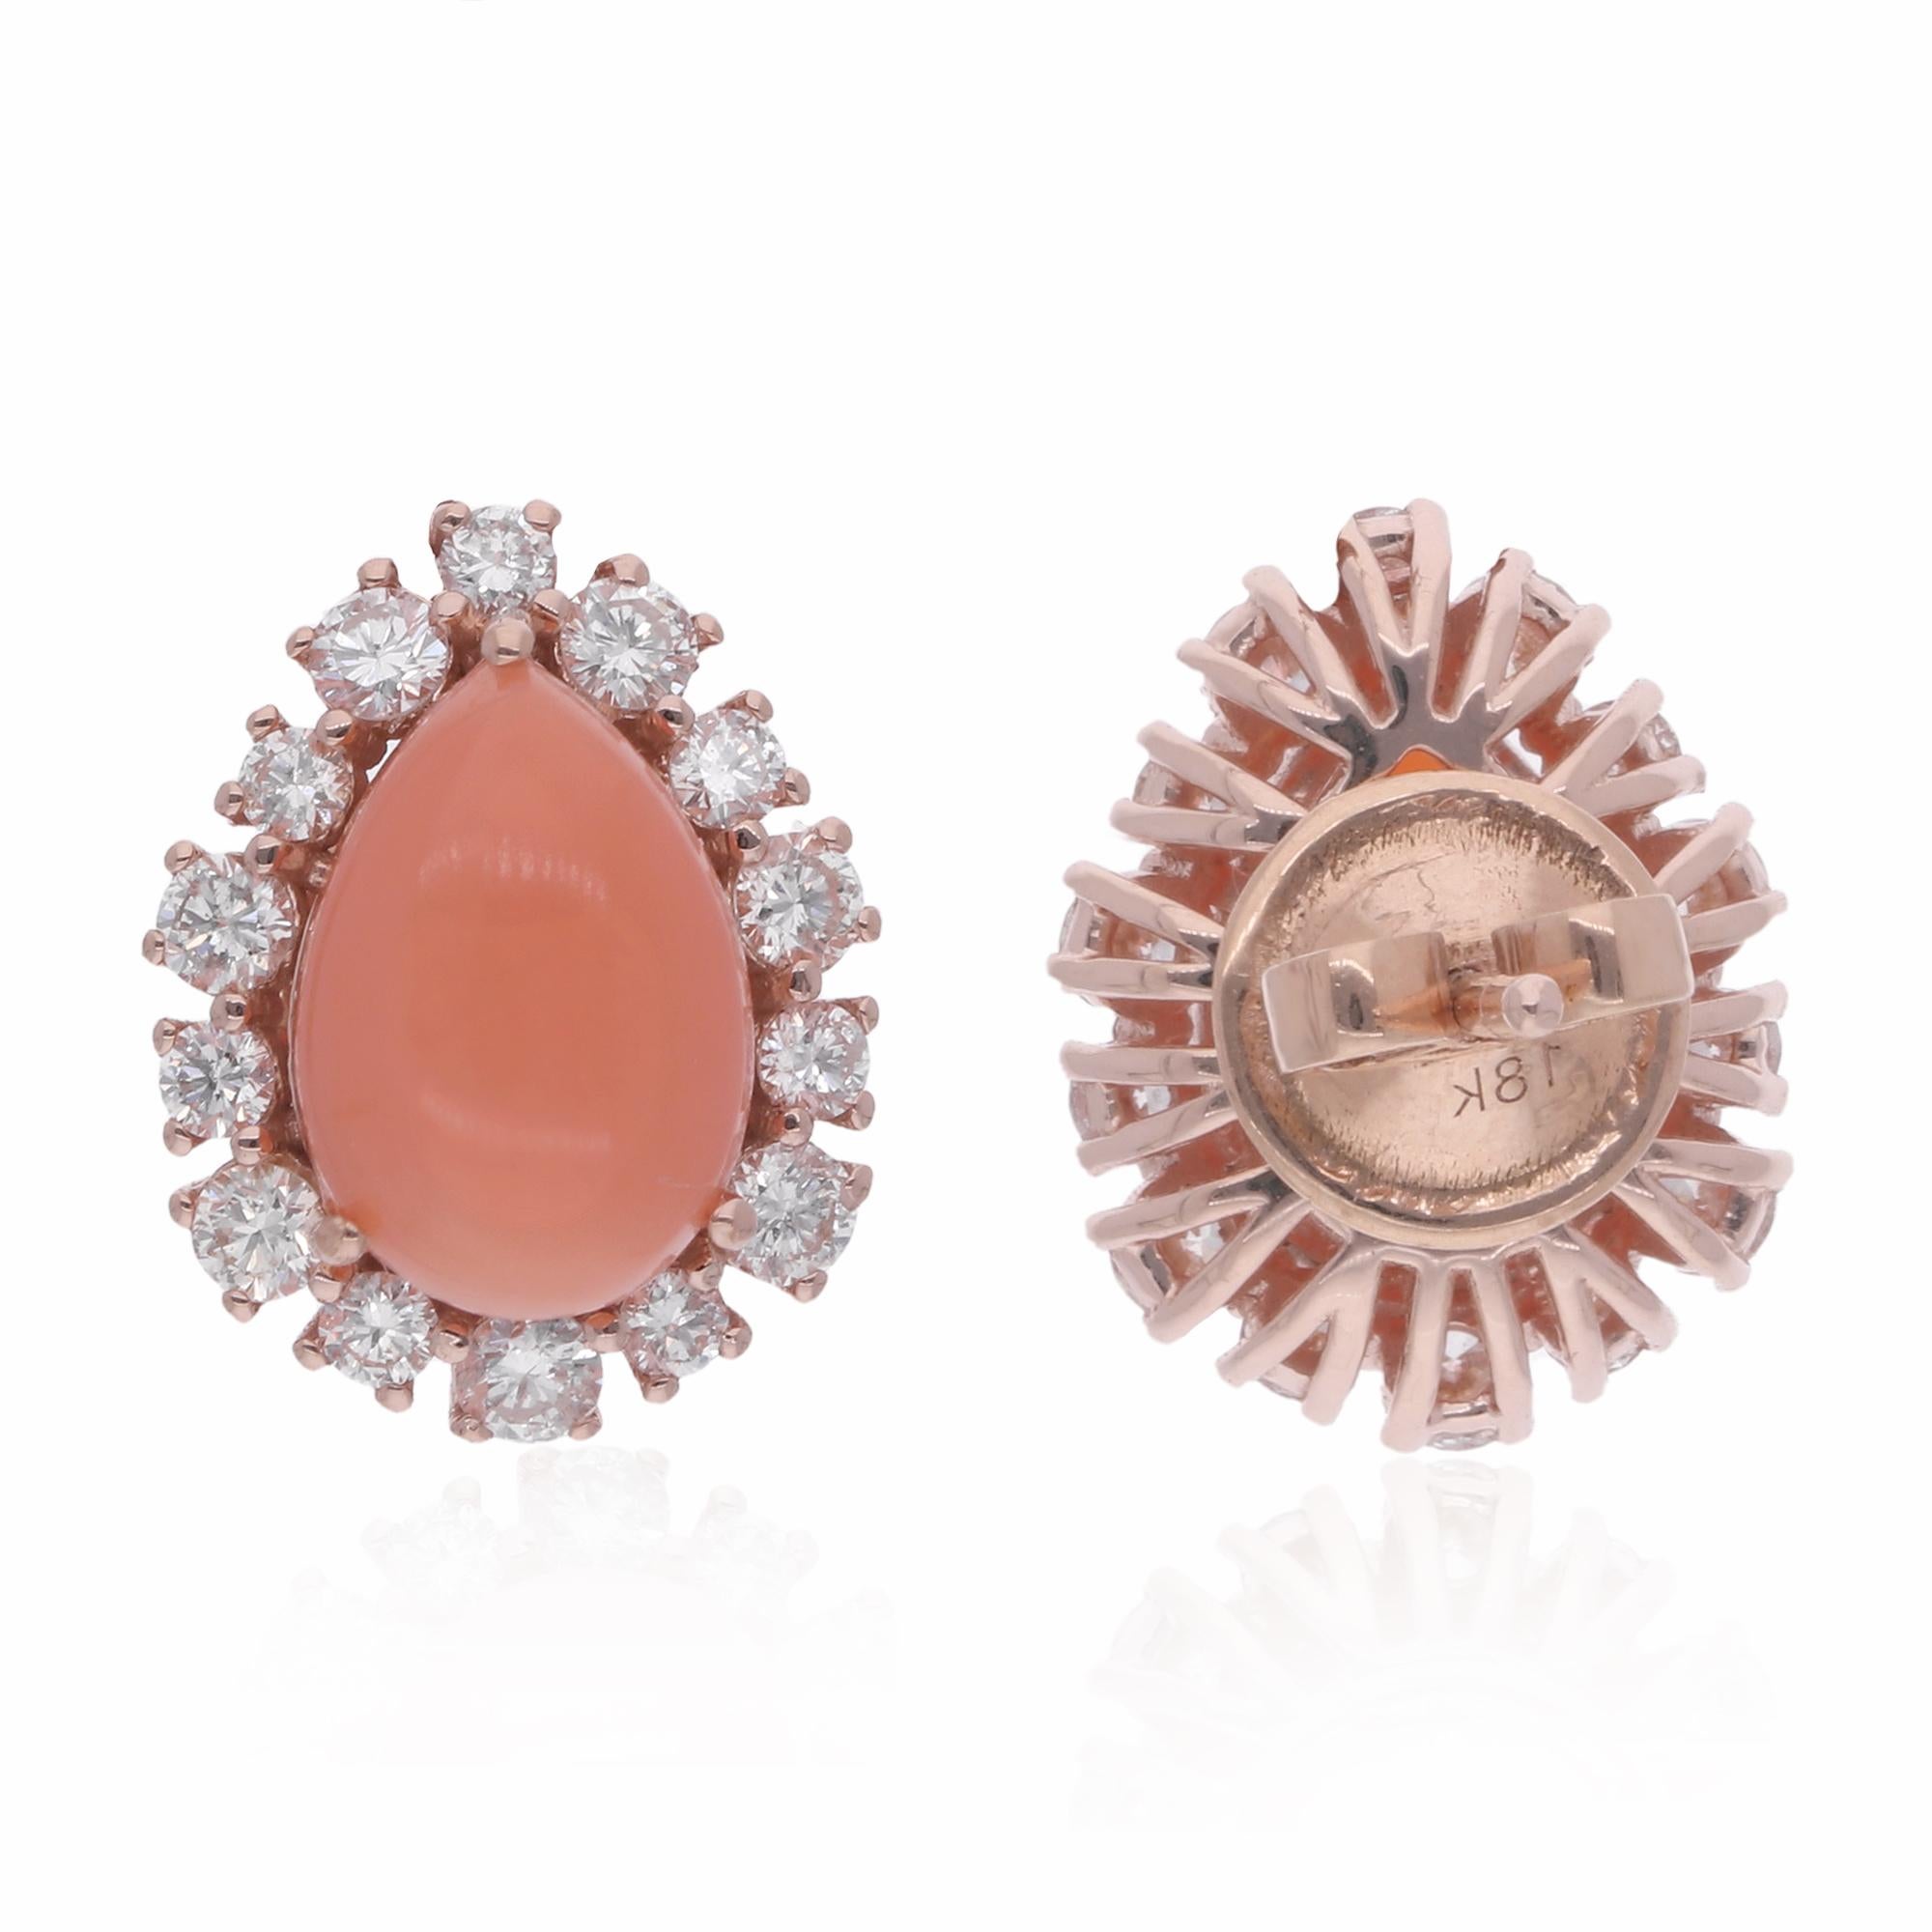 Surrounding the coral gemstone are delicate Diamonds, meticulously set in a halo design. These Diamonds, selected for their exceptional sparkle and brilliance, add a touch of luxury and glamour to the earrings, enhancing the beauty of the coral with